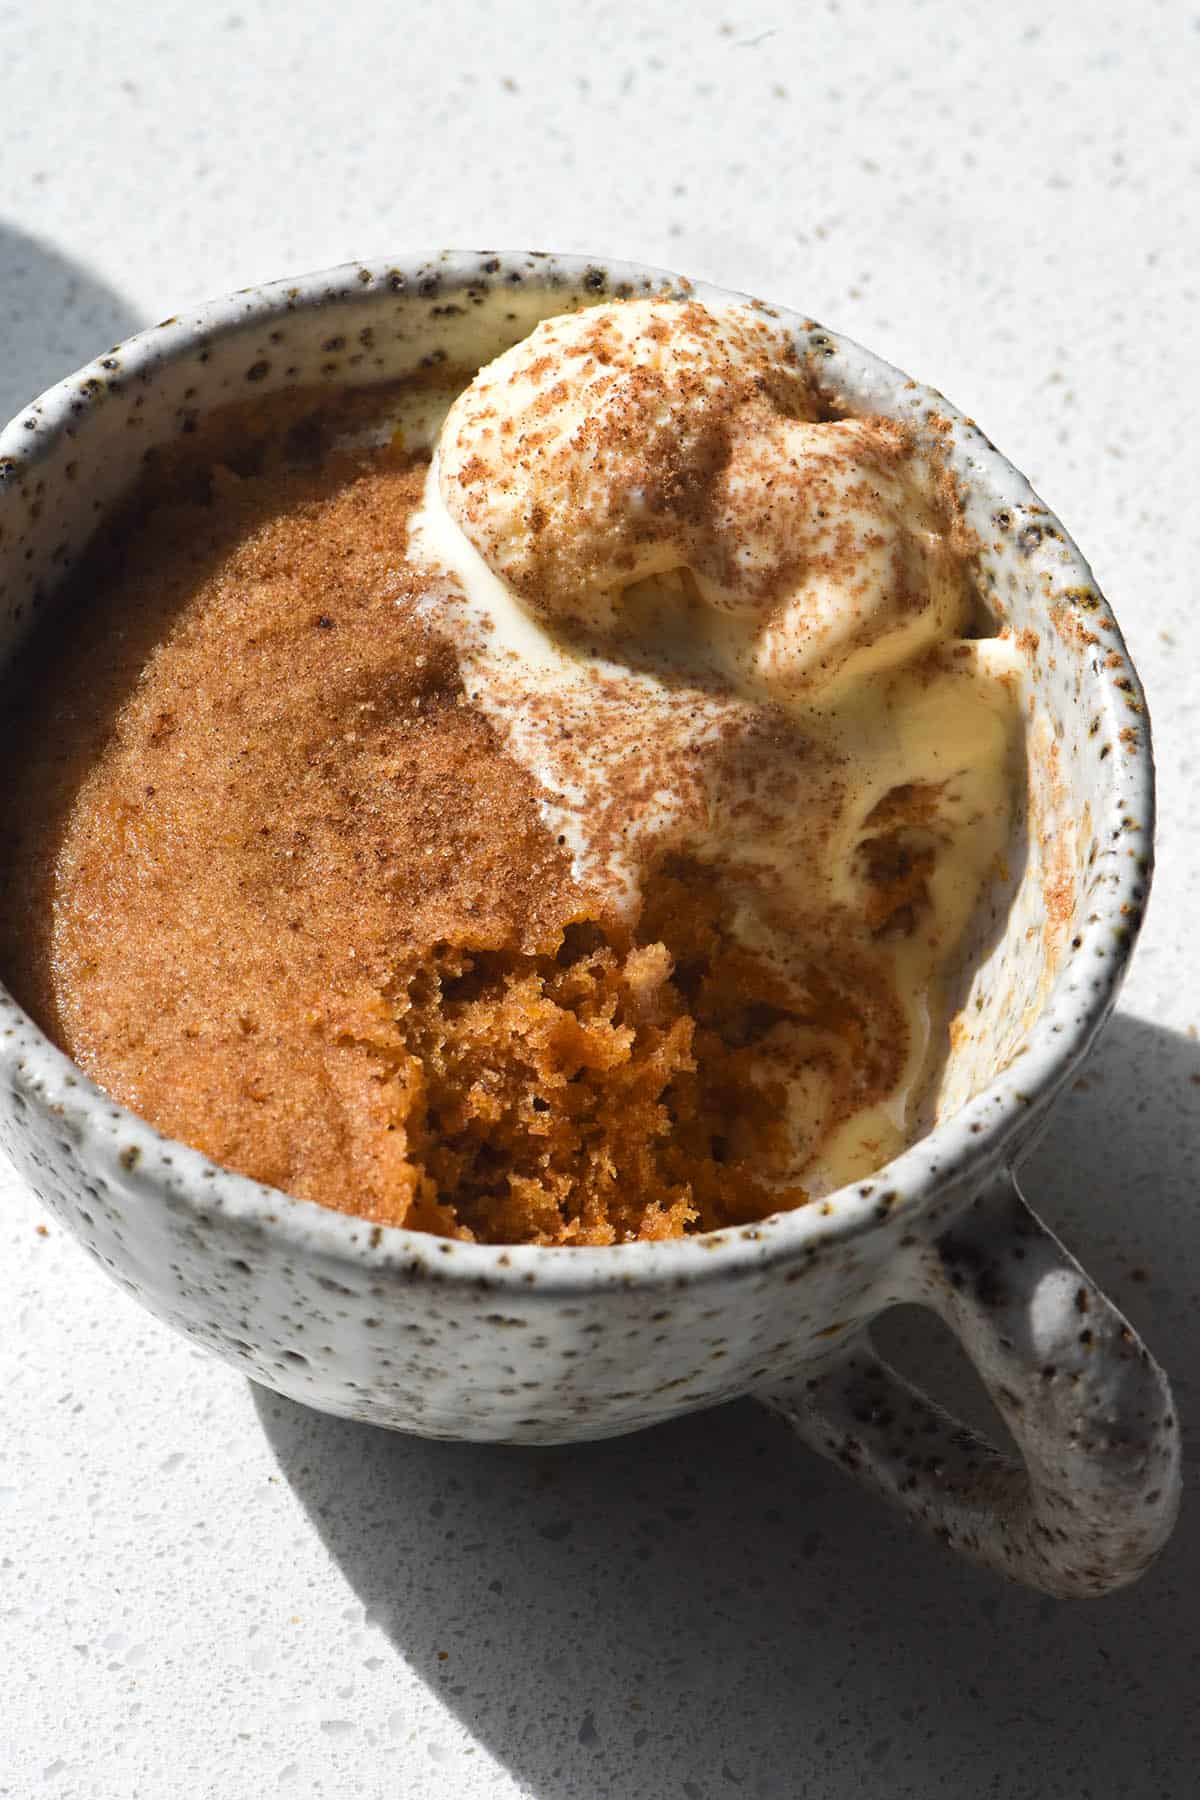 A side on close up view of a gluten free and vegan pumpkin mug cake. The cake sits in a ceramic white speckled mug against a white speckled countertop. It is topped with melting ice cream and a dusting of cinnamon sugar. A big spoonful has been taken out of the front of the mug cake, revealing the orange crumb below the surface